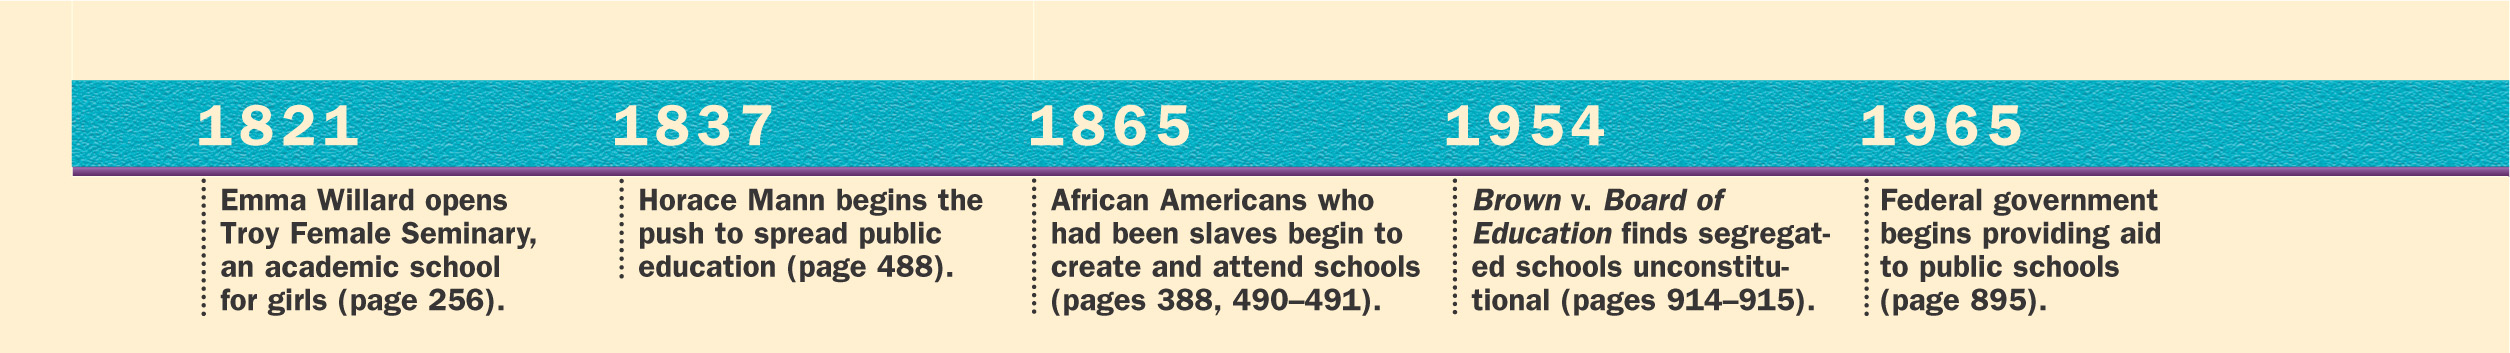 A timeline shows events in Education in the U.S. from 1821 to 2005.